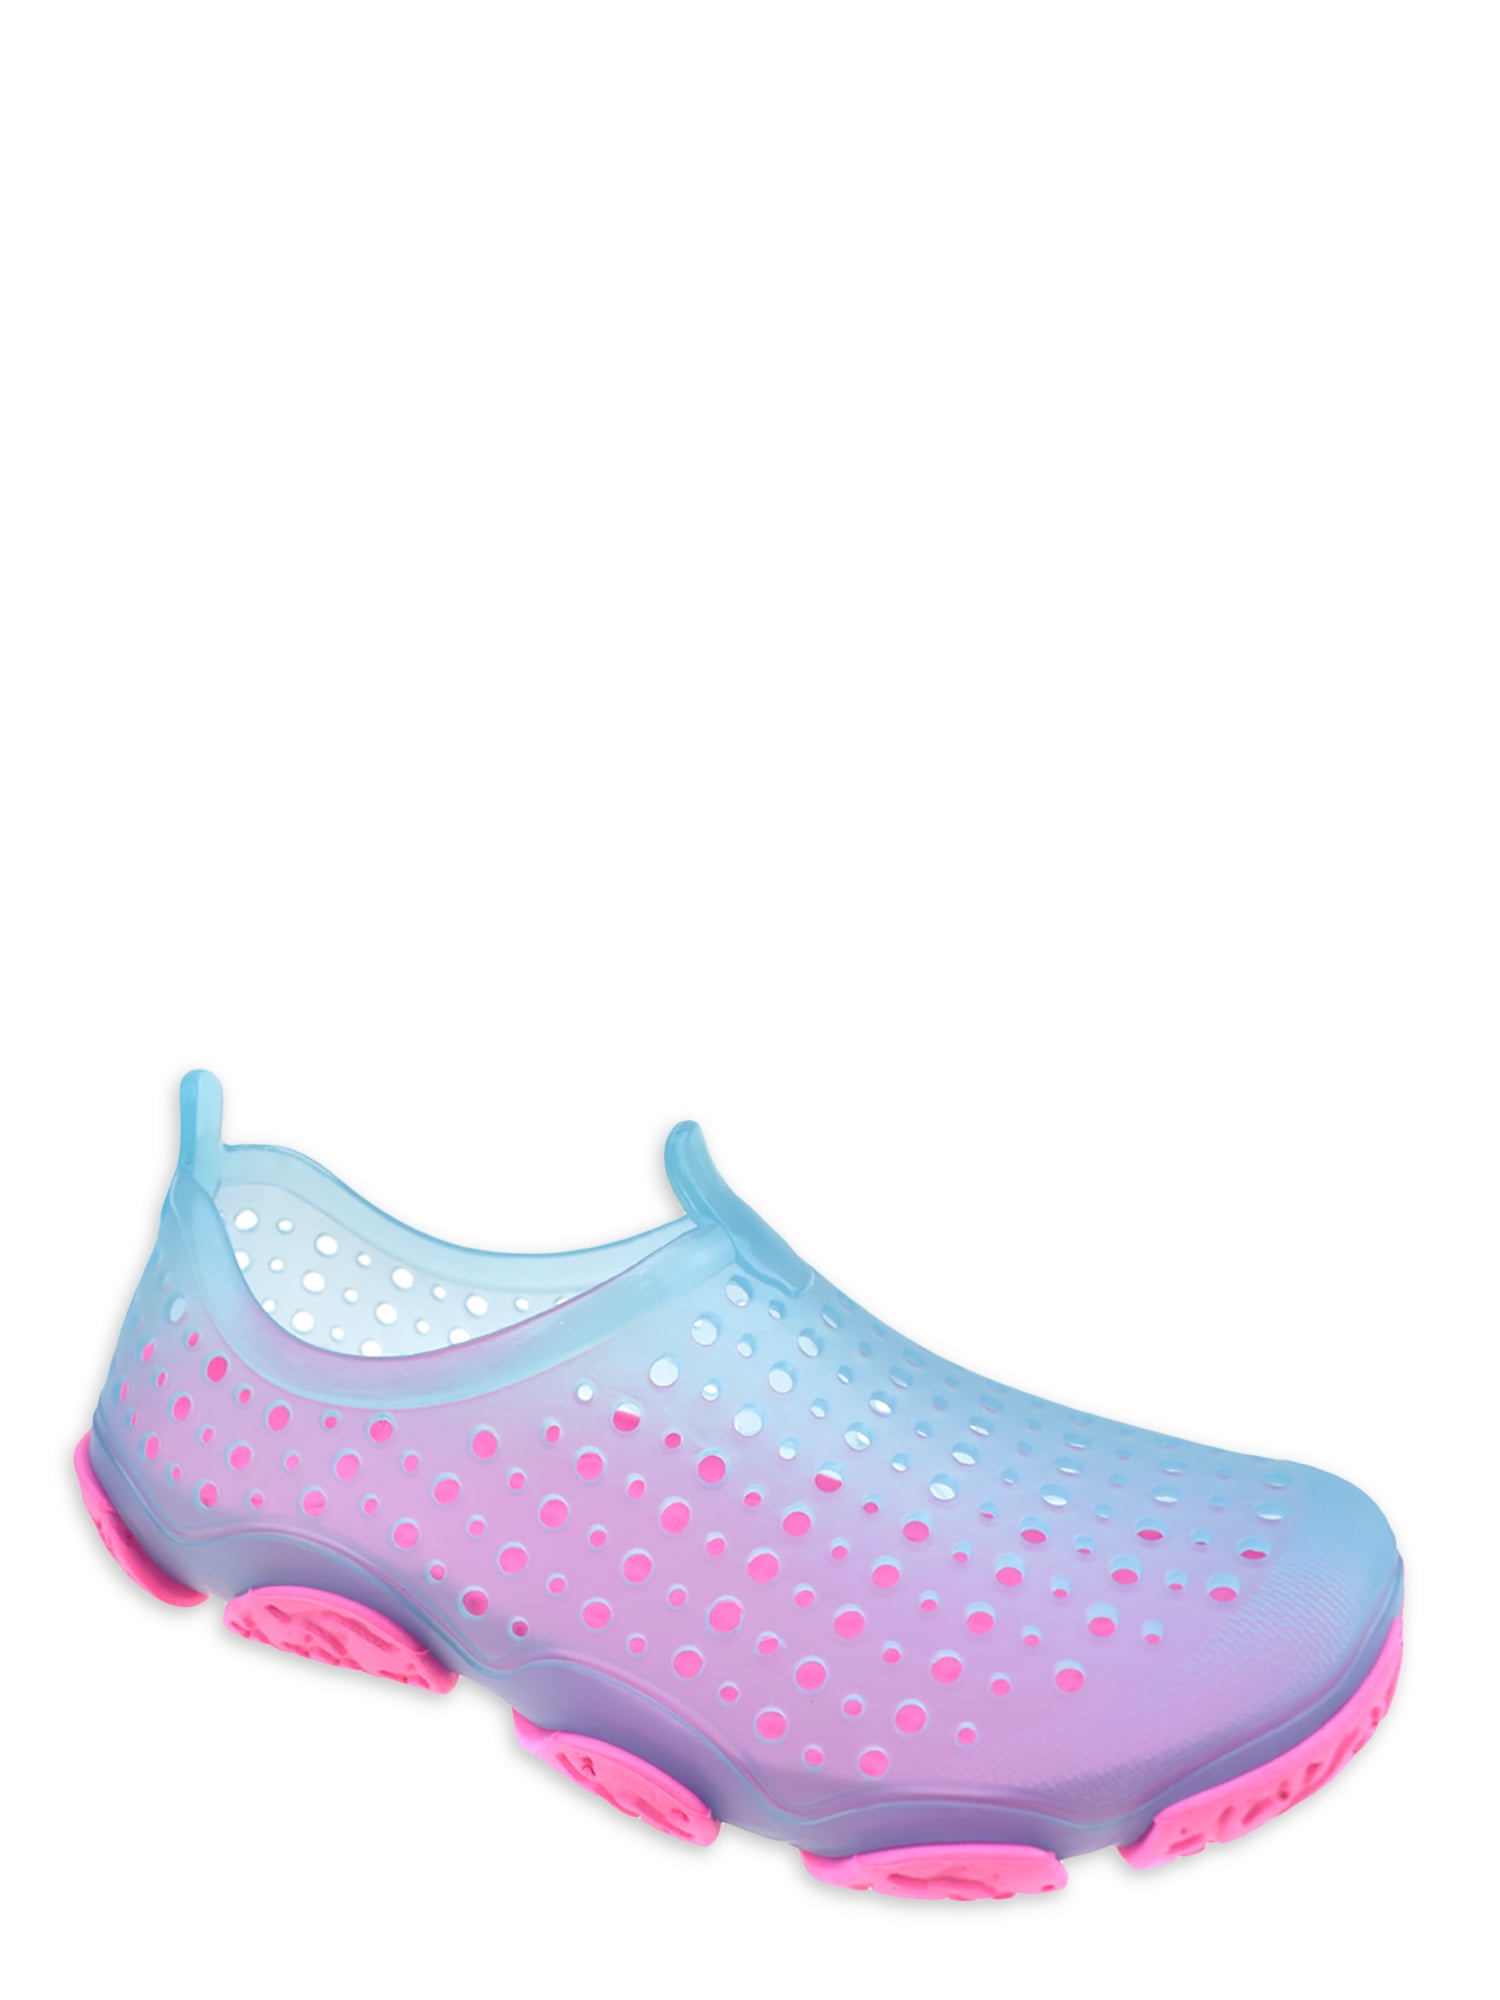 Wonder Nation Slip-on Jelly Water Shoes 